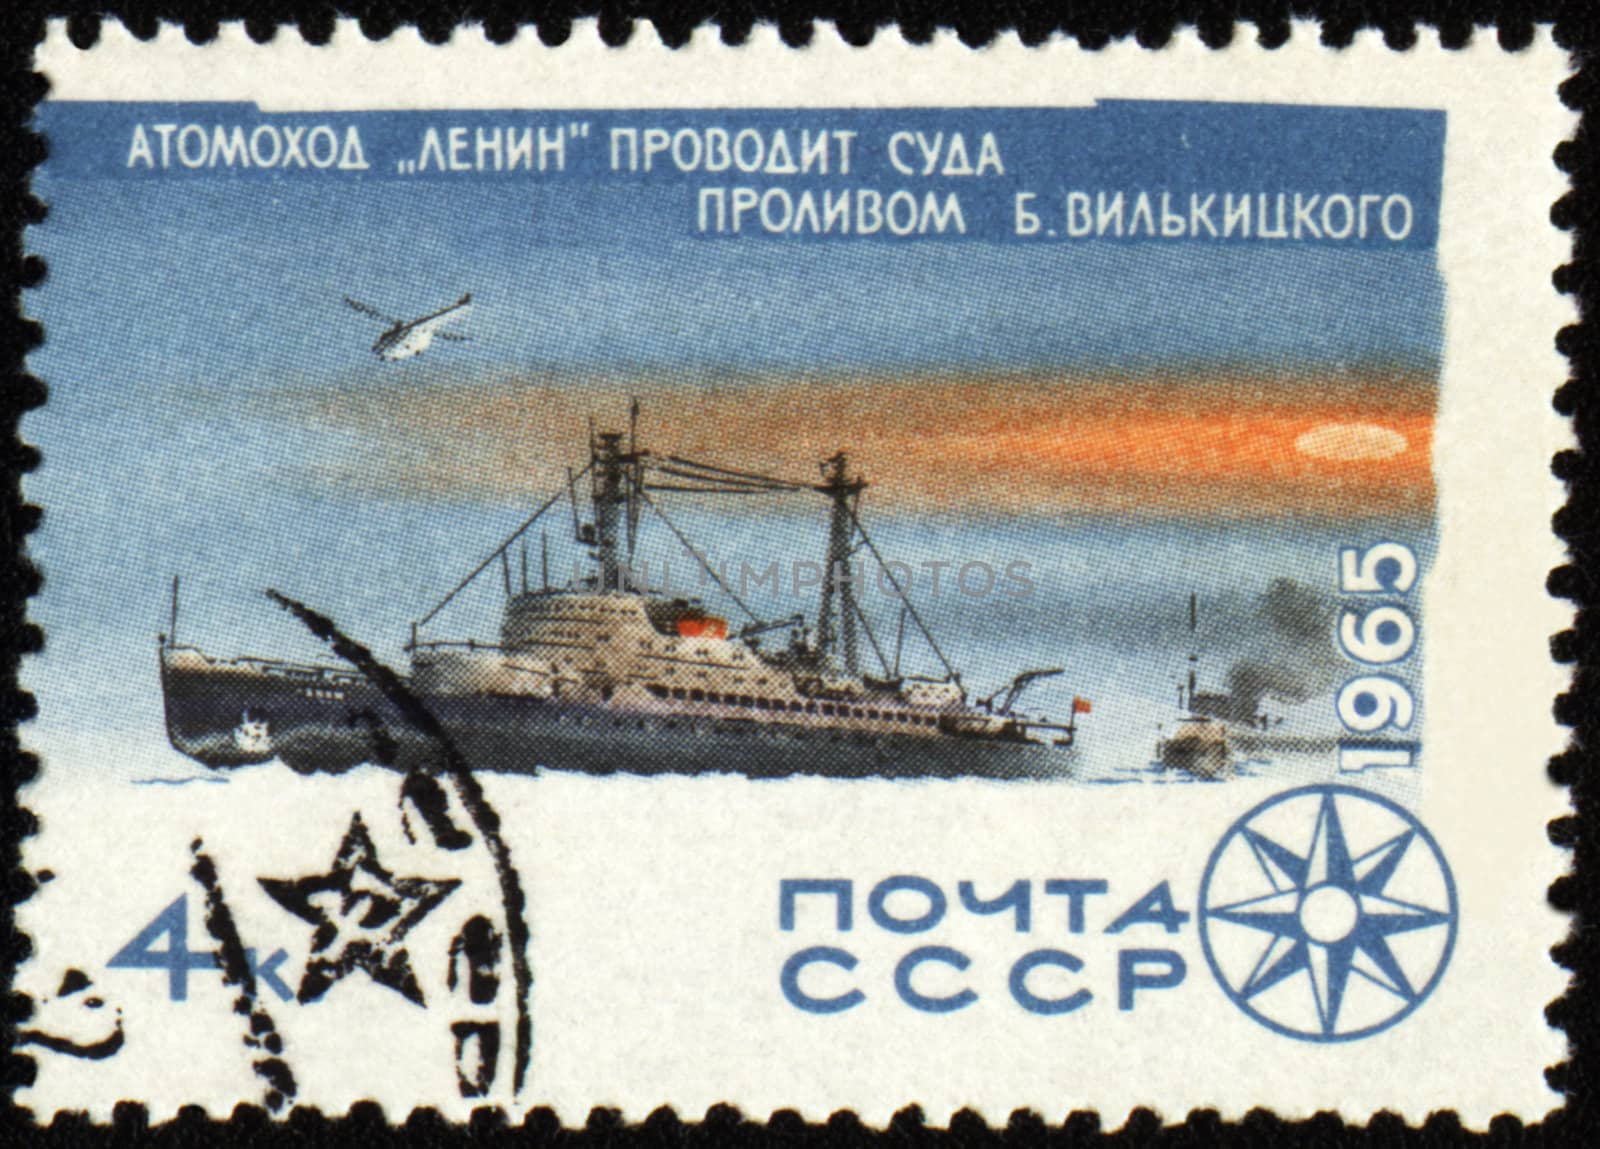 Nuclear-powered icebreaker Lenin in Arctic on post stamp by wander